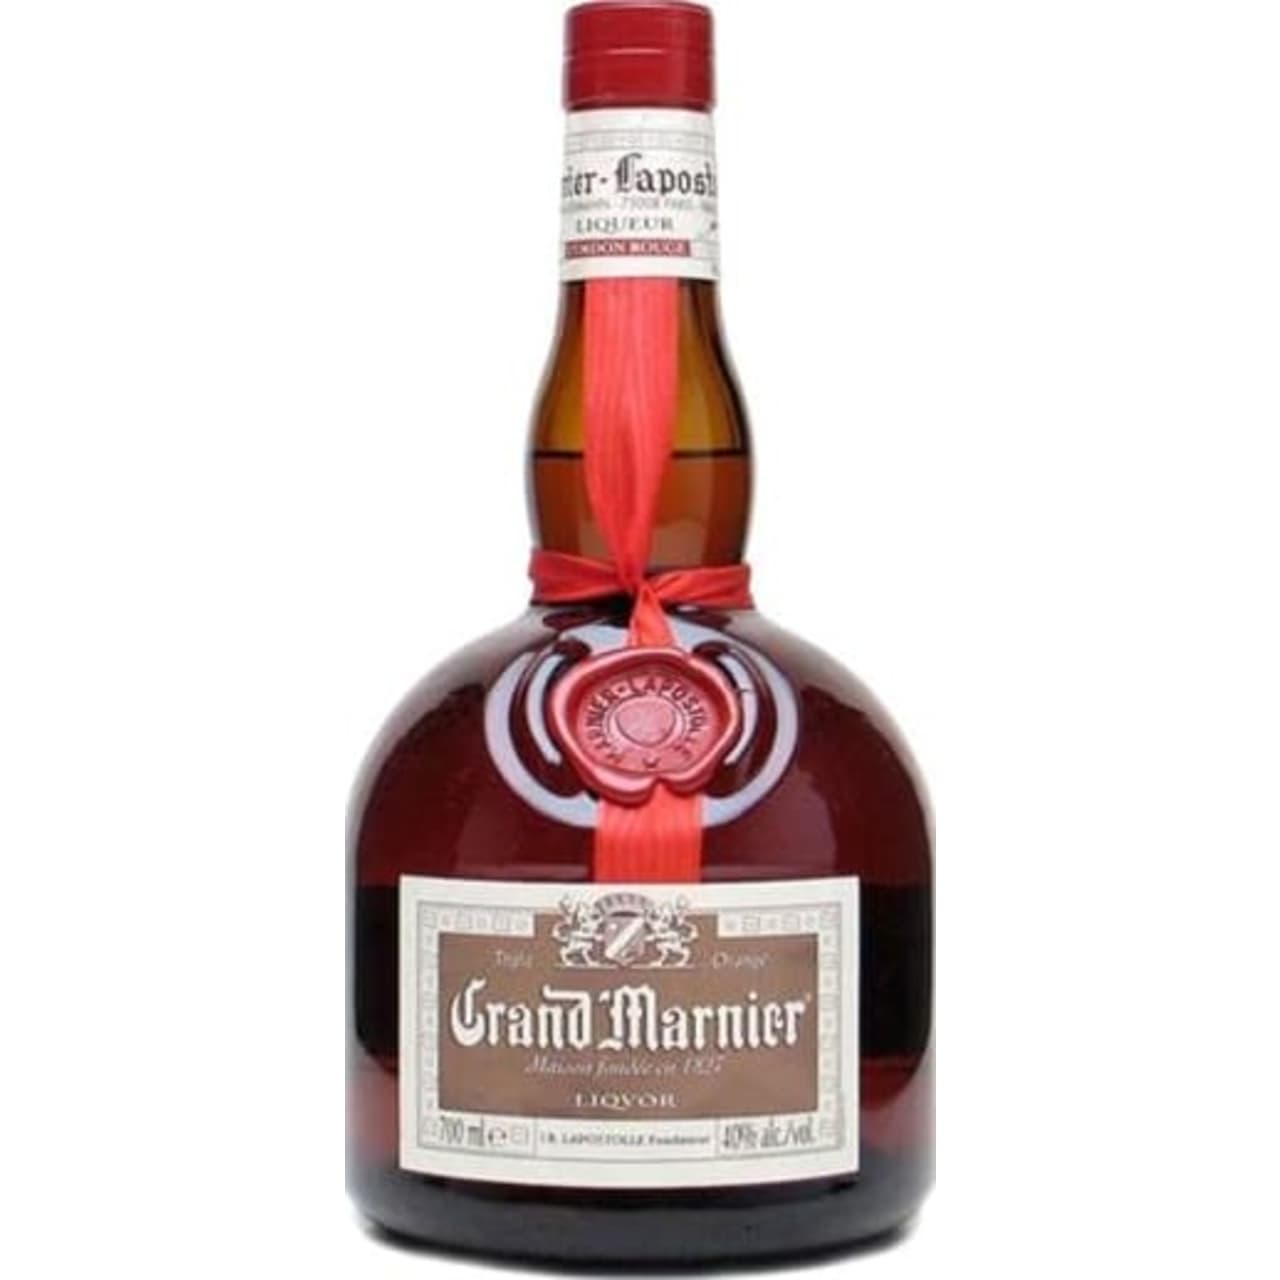 The iconic signature expression from Grand Marnier, Cordon Rouge is a superb orange liqueur made with fine Cognac sourced from the region’s various crus, flavoured with the bitter essence of wild oranges.